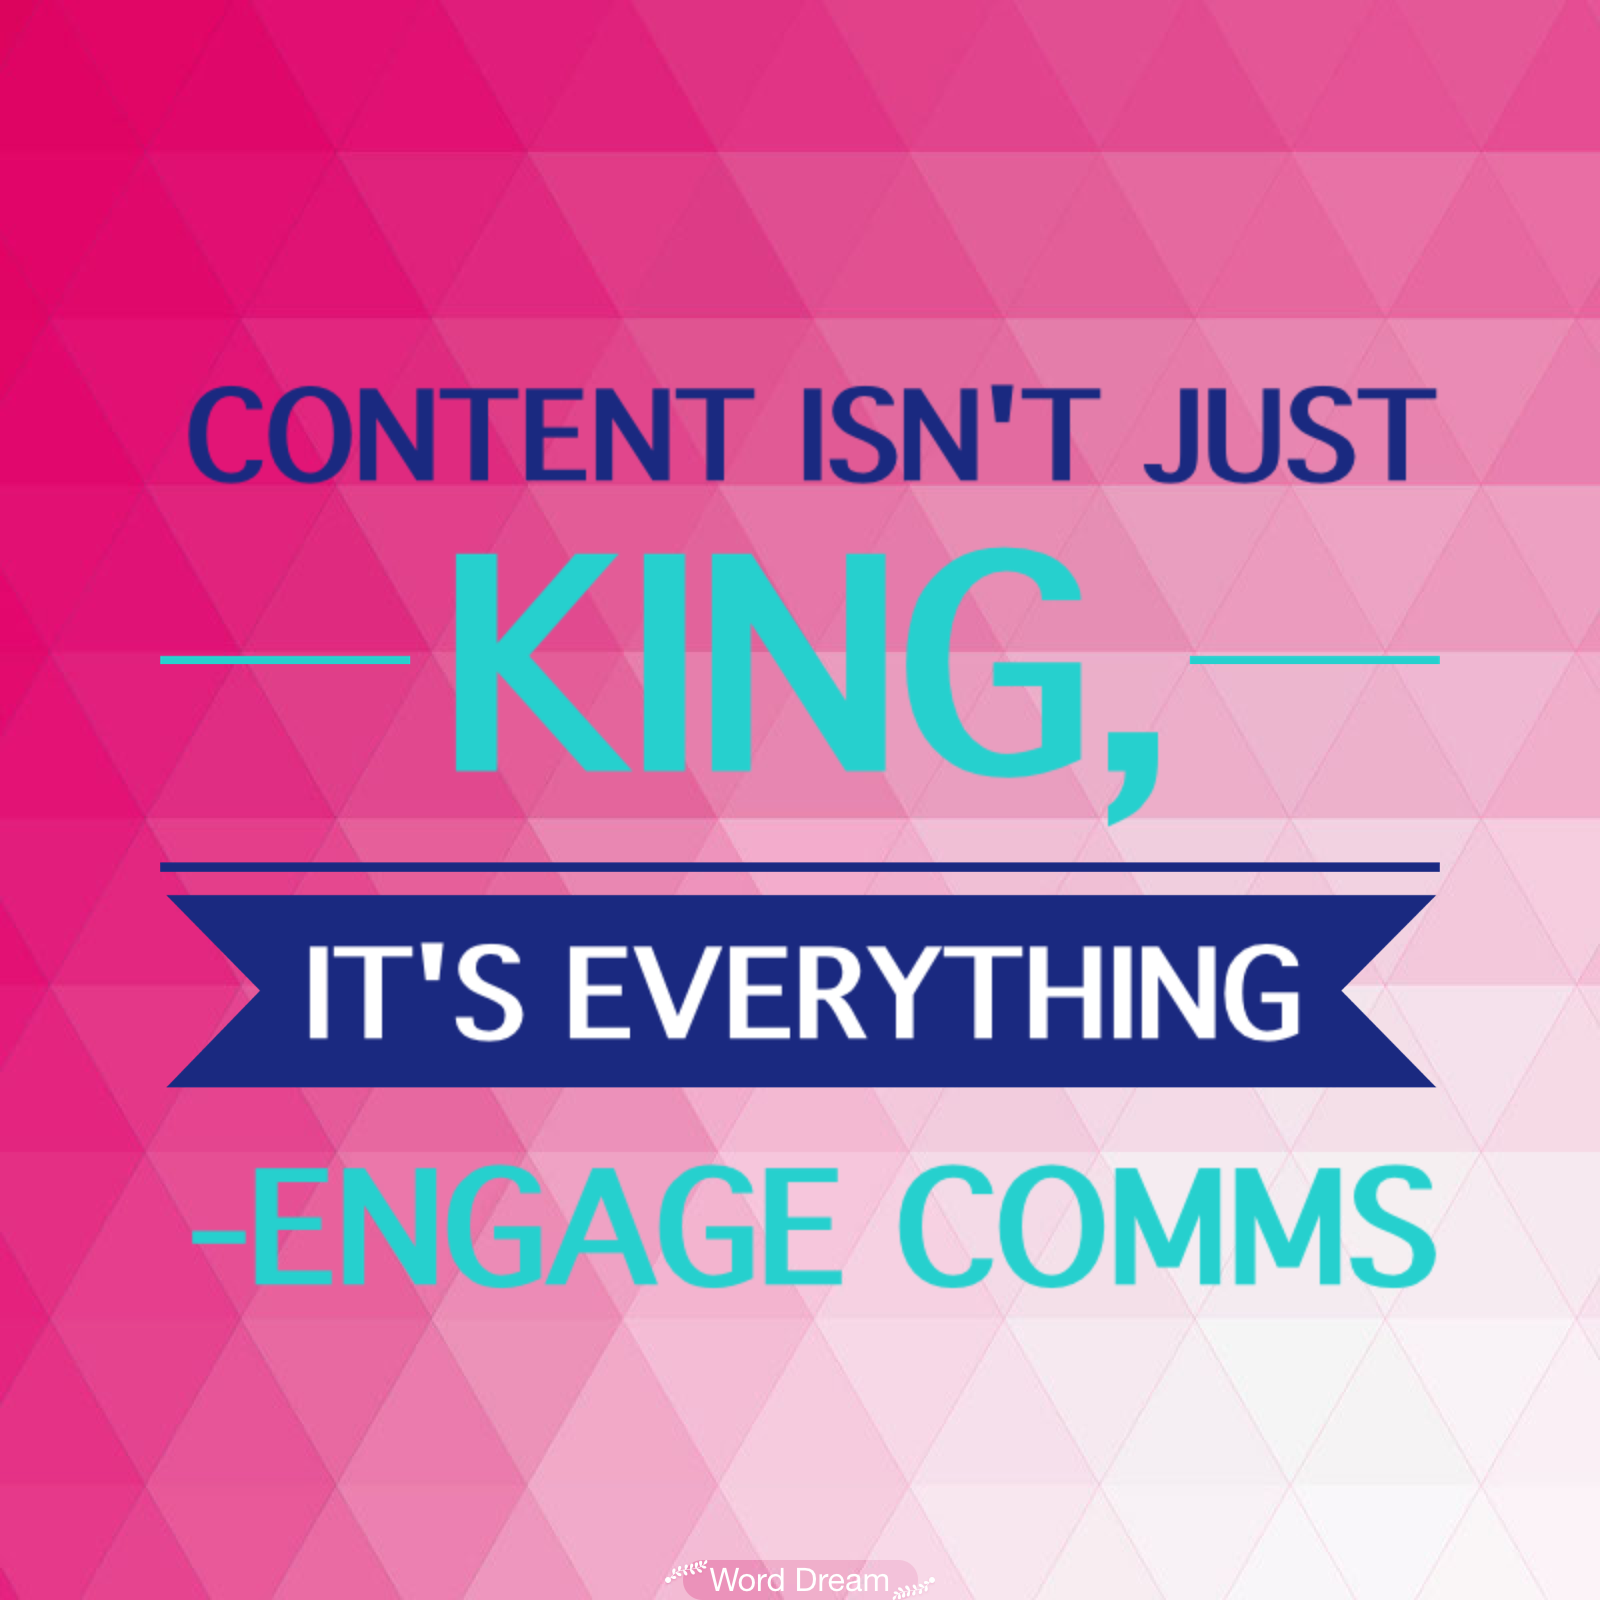 Engage Comms content isn't just king quote